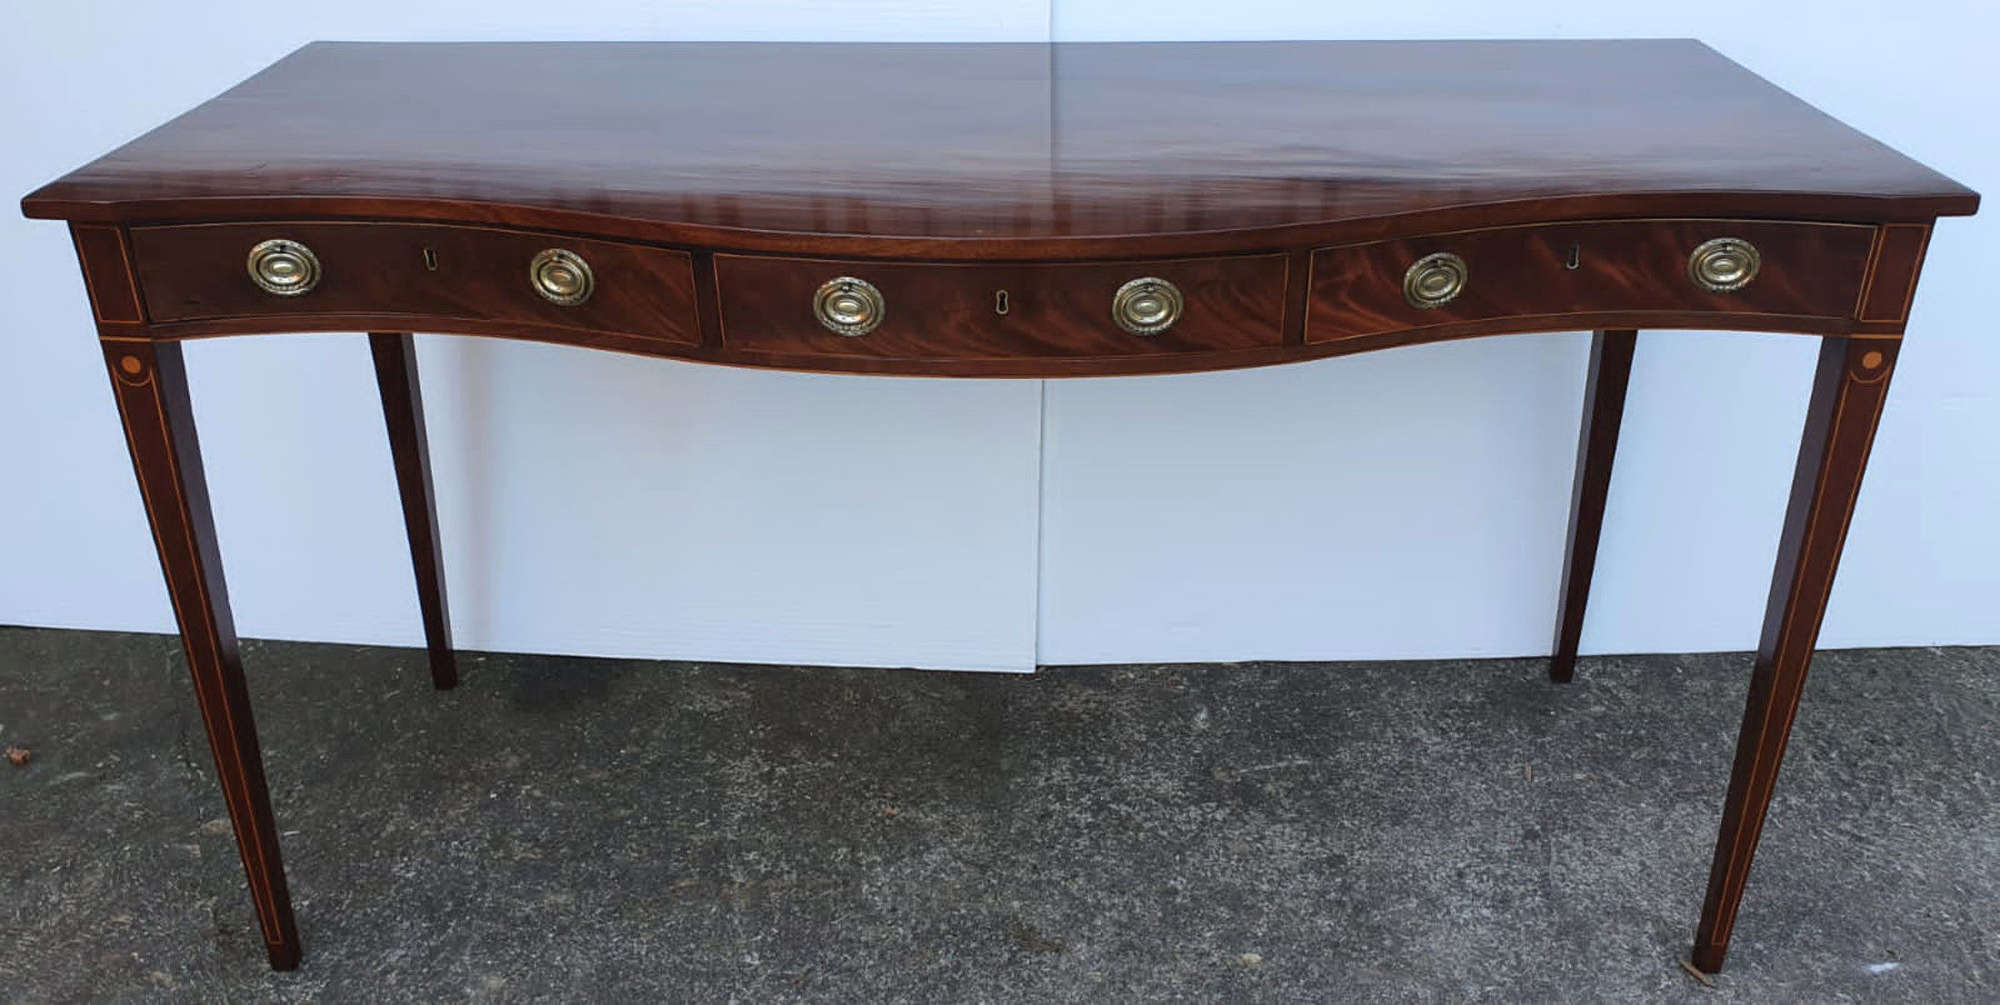 Early 19th Century Mahogany Serving Or Antique Console Table